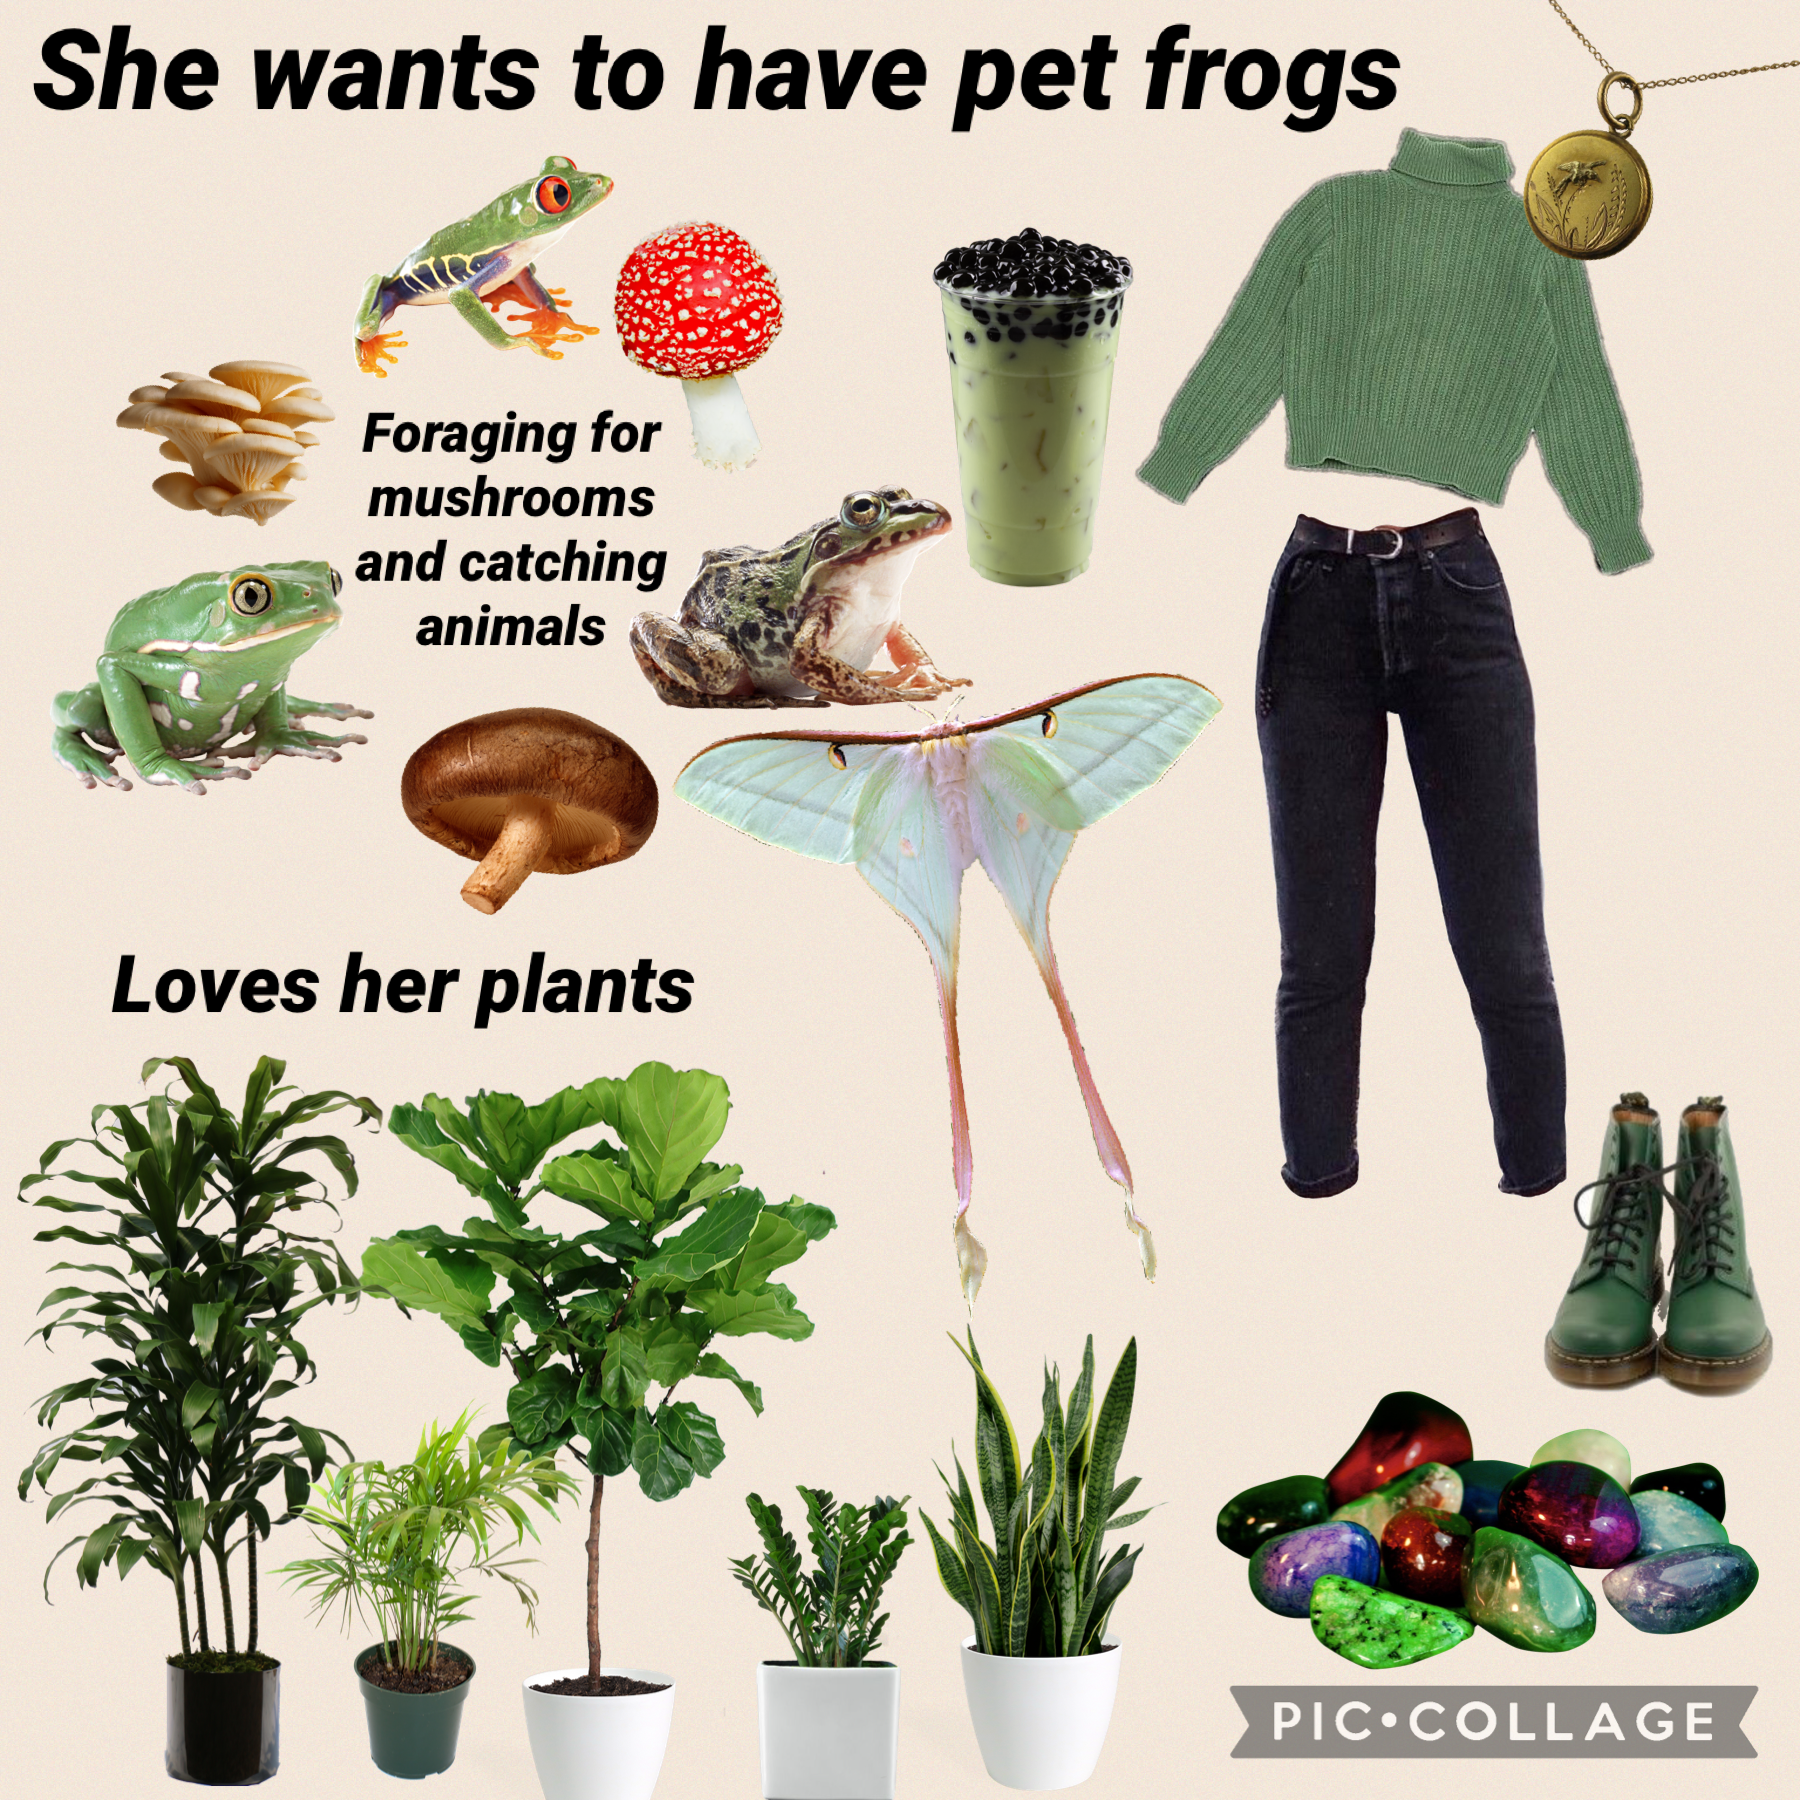 Who else wants a frog 🙋🏻‍♀️ made this one for my friend 🍄🐸🌱